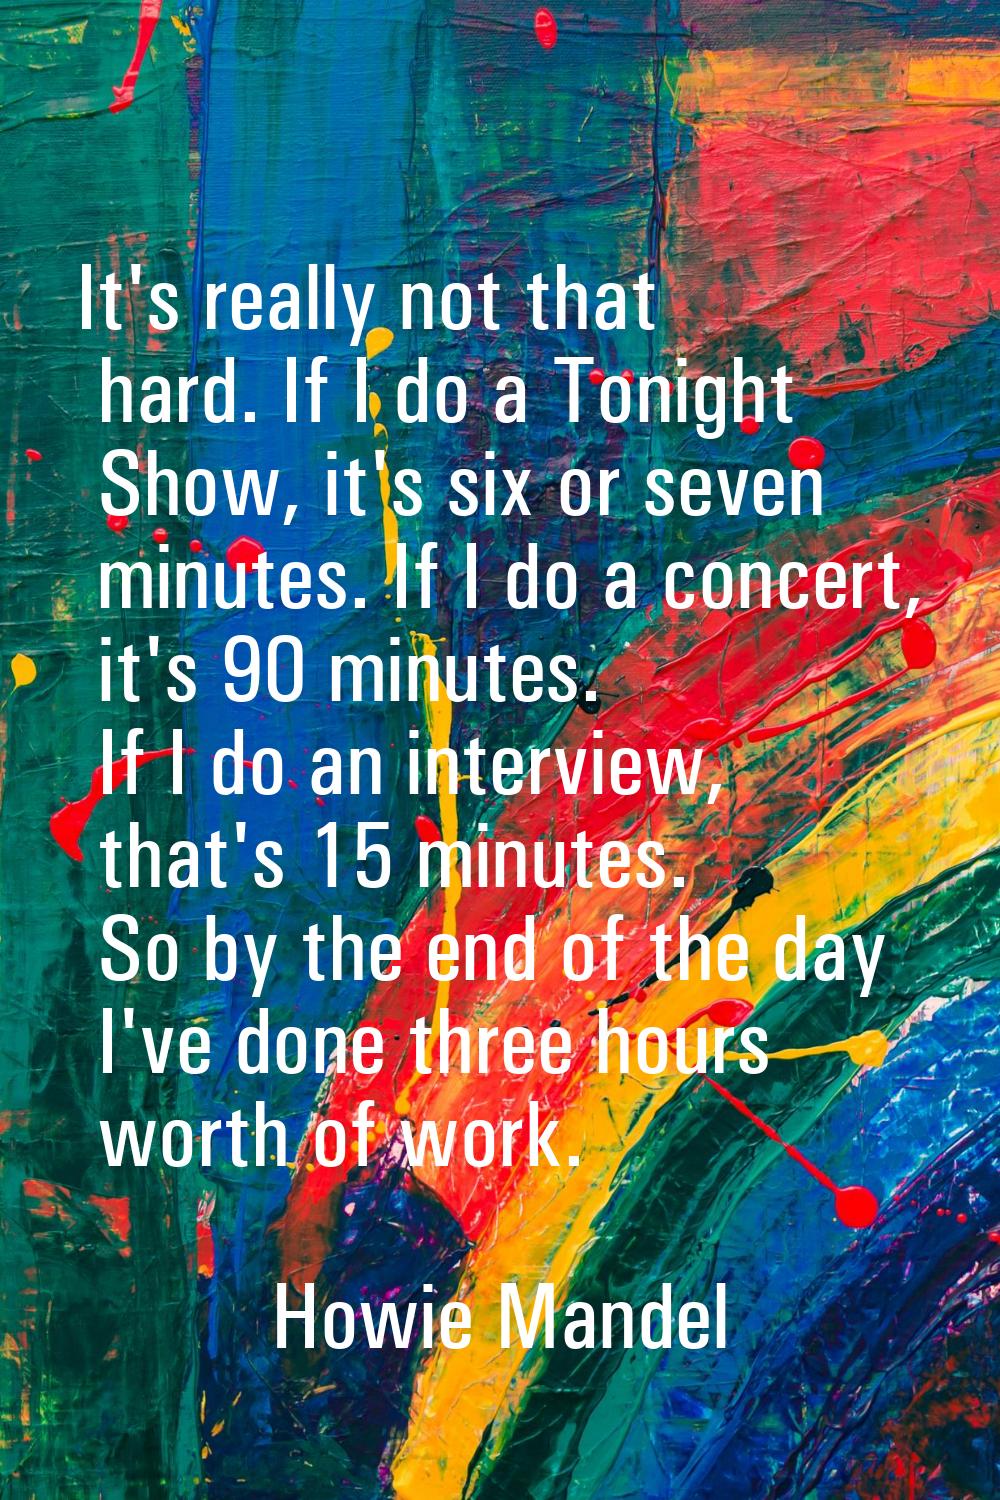 It's really not that hard. If I do a Tonight Show, it's six or seven minutes. If I do a concert, it